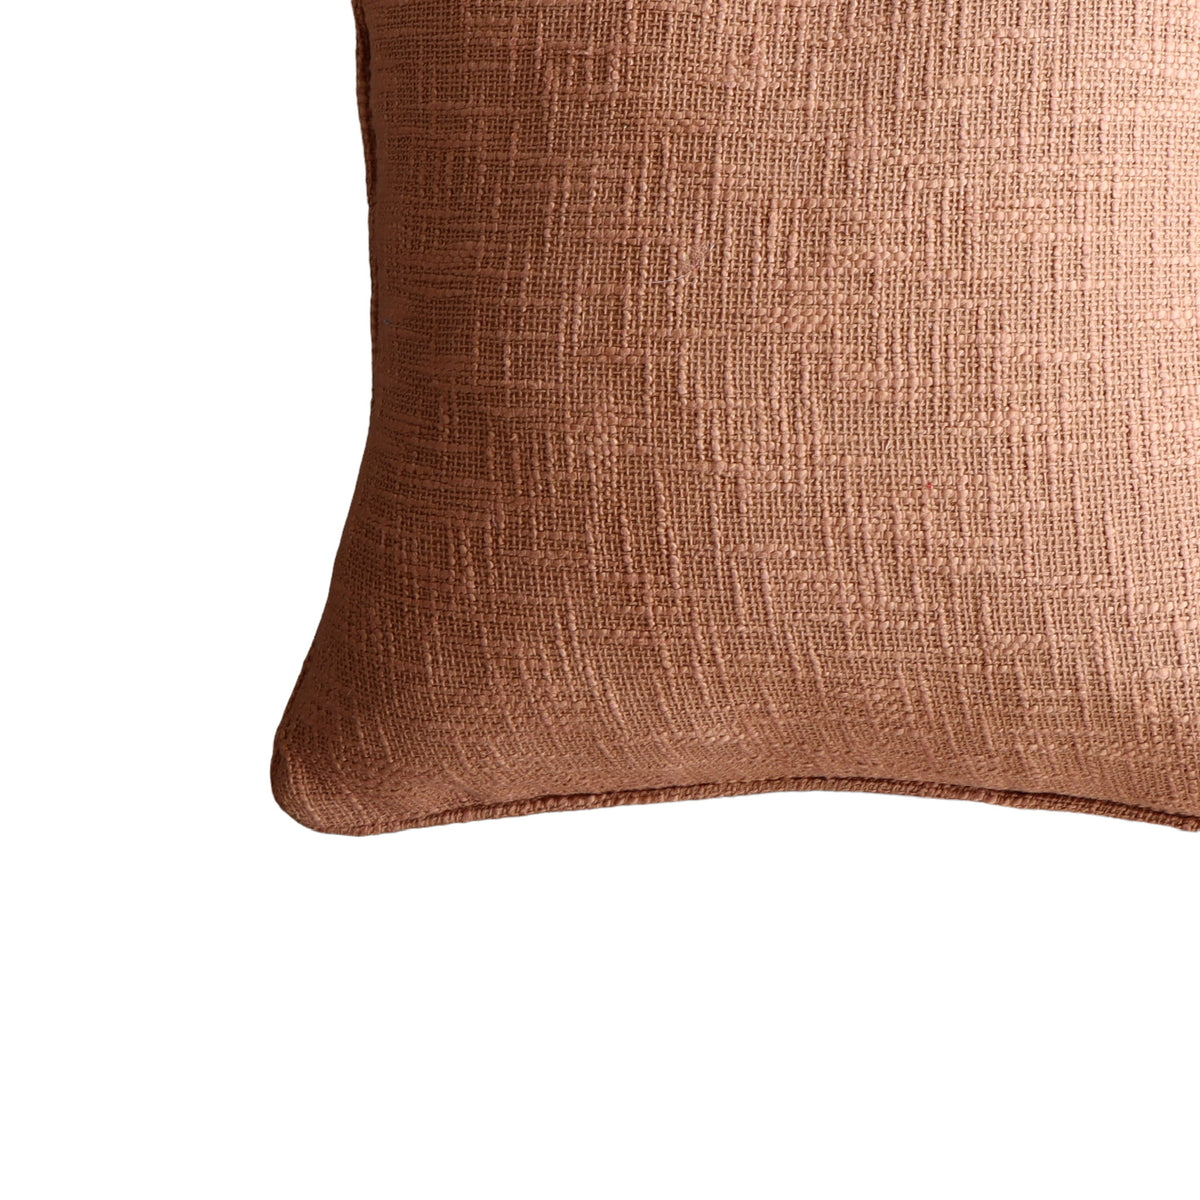 Terracotta Cotton Pillow Cover with Piping - 20 inch - Holistic Habitat 